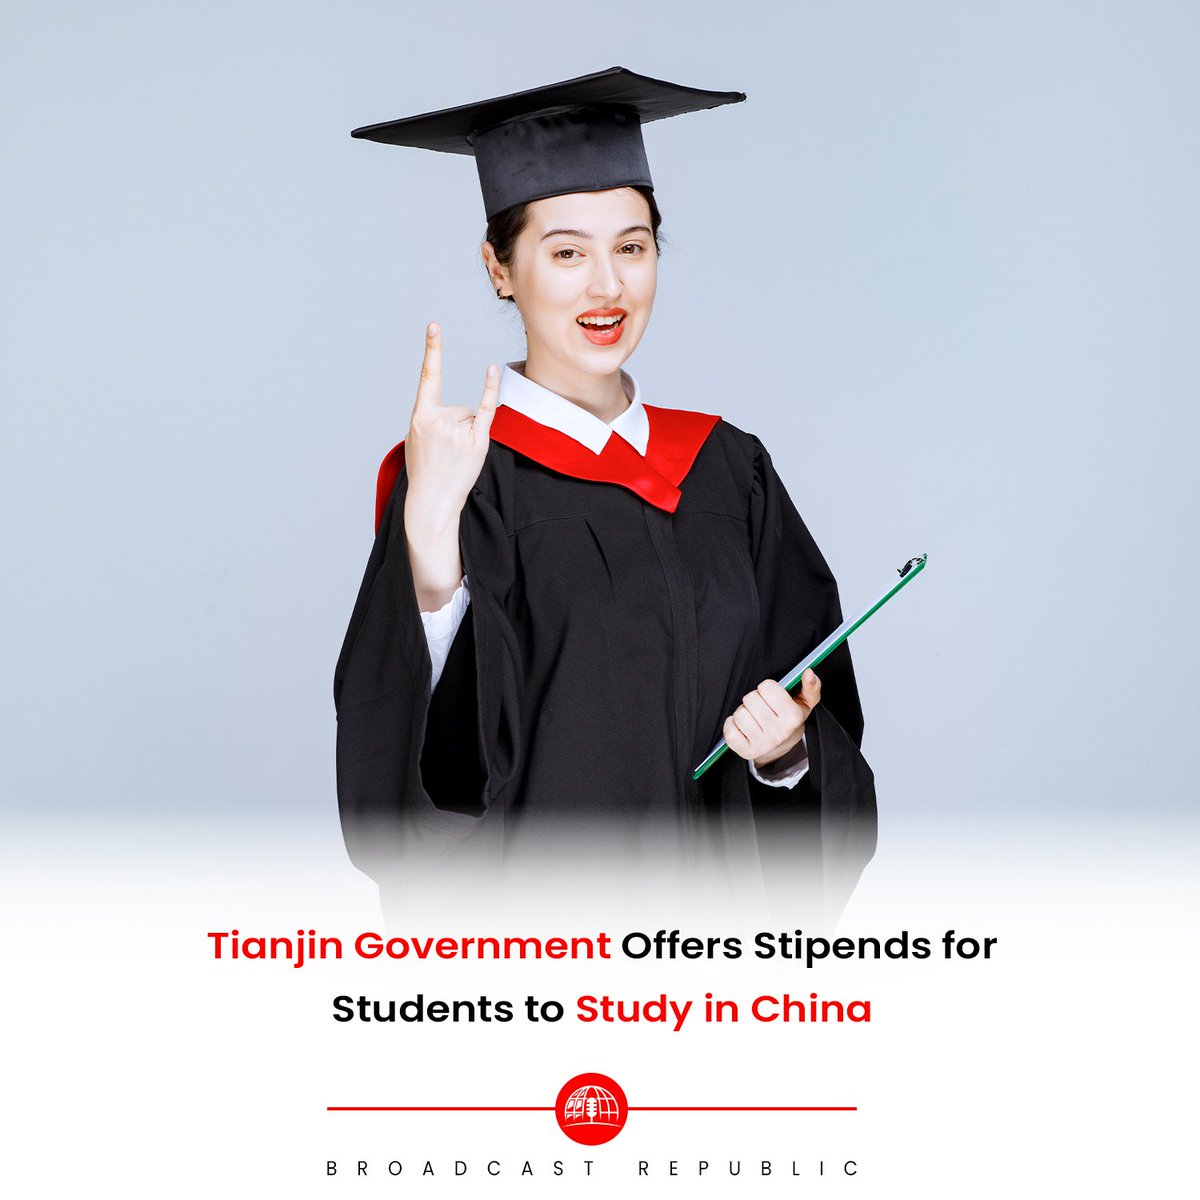 Exciting news for students! 
The Tianjin Government has announced a fully funded scholarship program for international students, covering tuition fees, living expenses, and medical insurance. 

#BroadcastRepublic #Scholarship #TianjinGovernment #FullyFunded #StudyinChina #Stipend